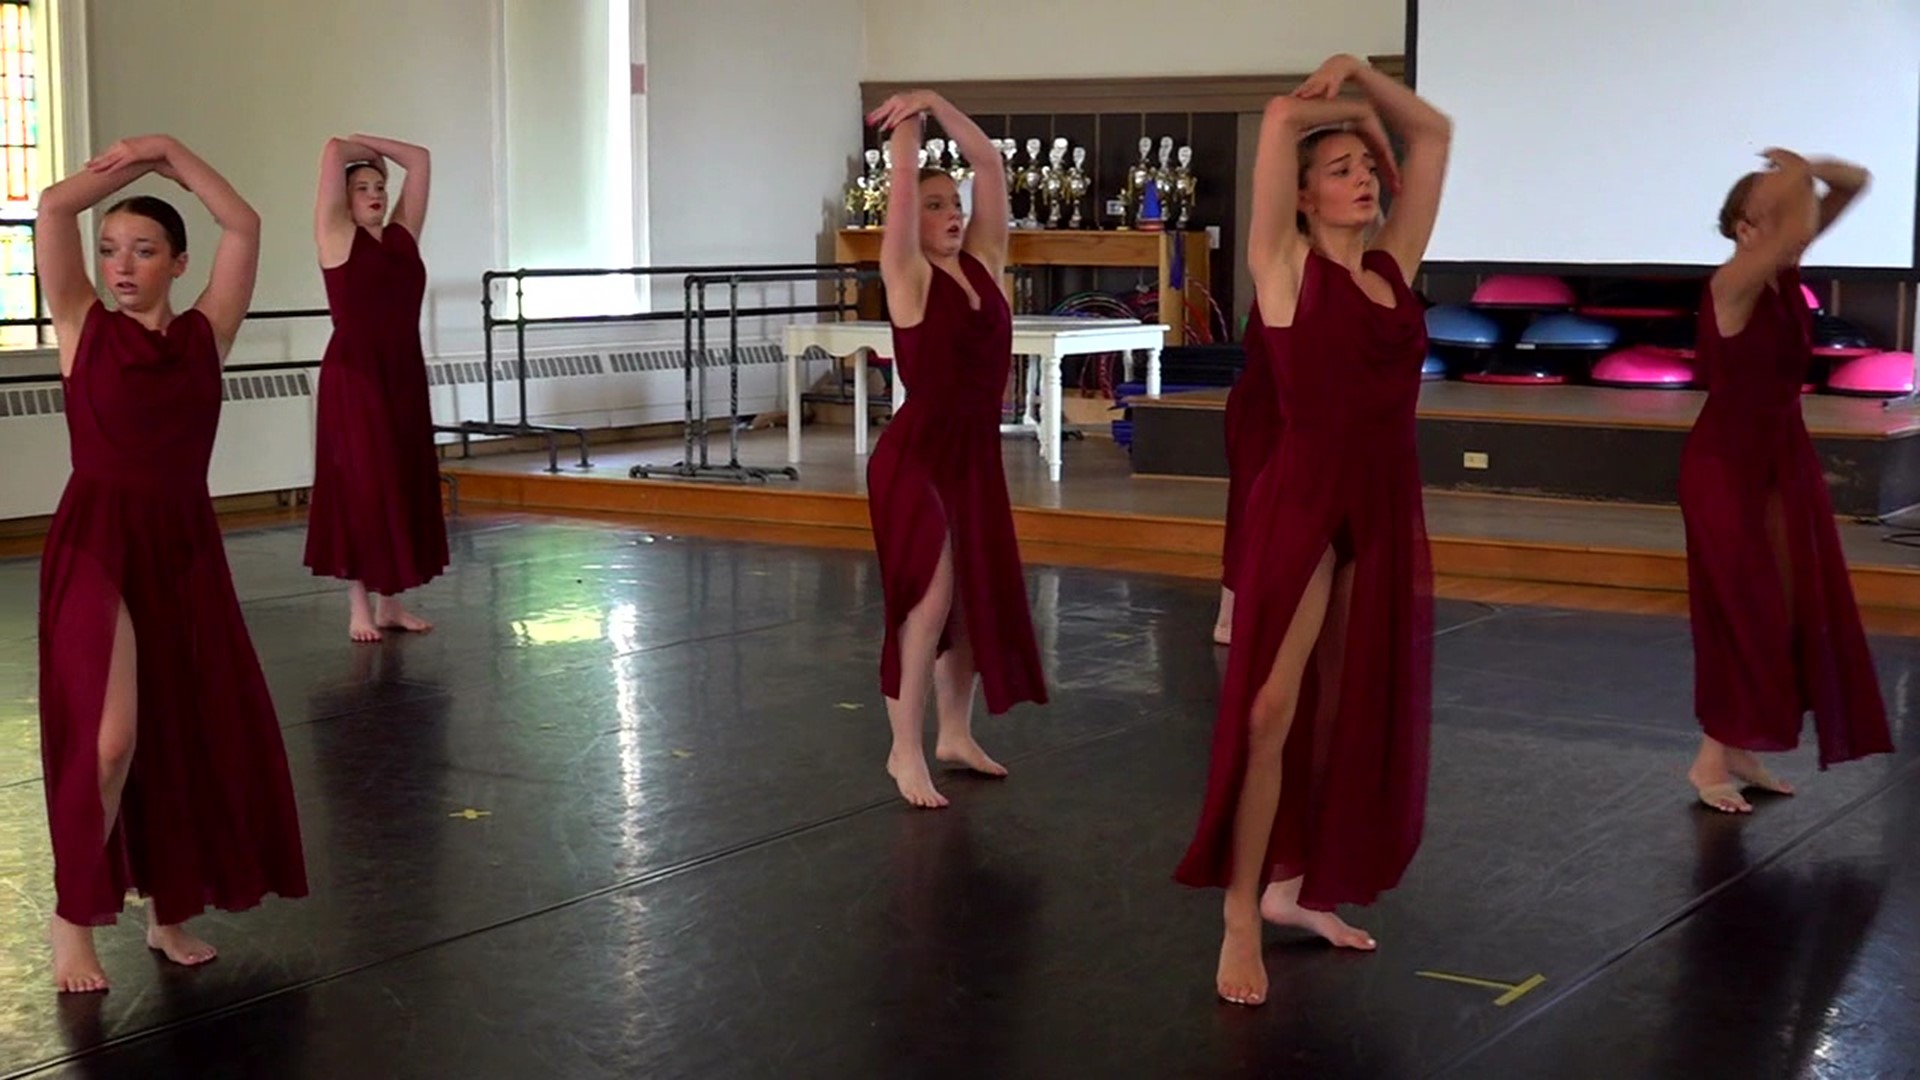 Dancers are getting ready to spend their summer break training at prestigious conservatories throughout the country thanks to a special program in Schuylkill Haven.